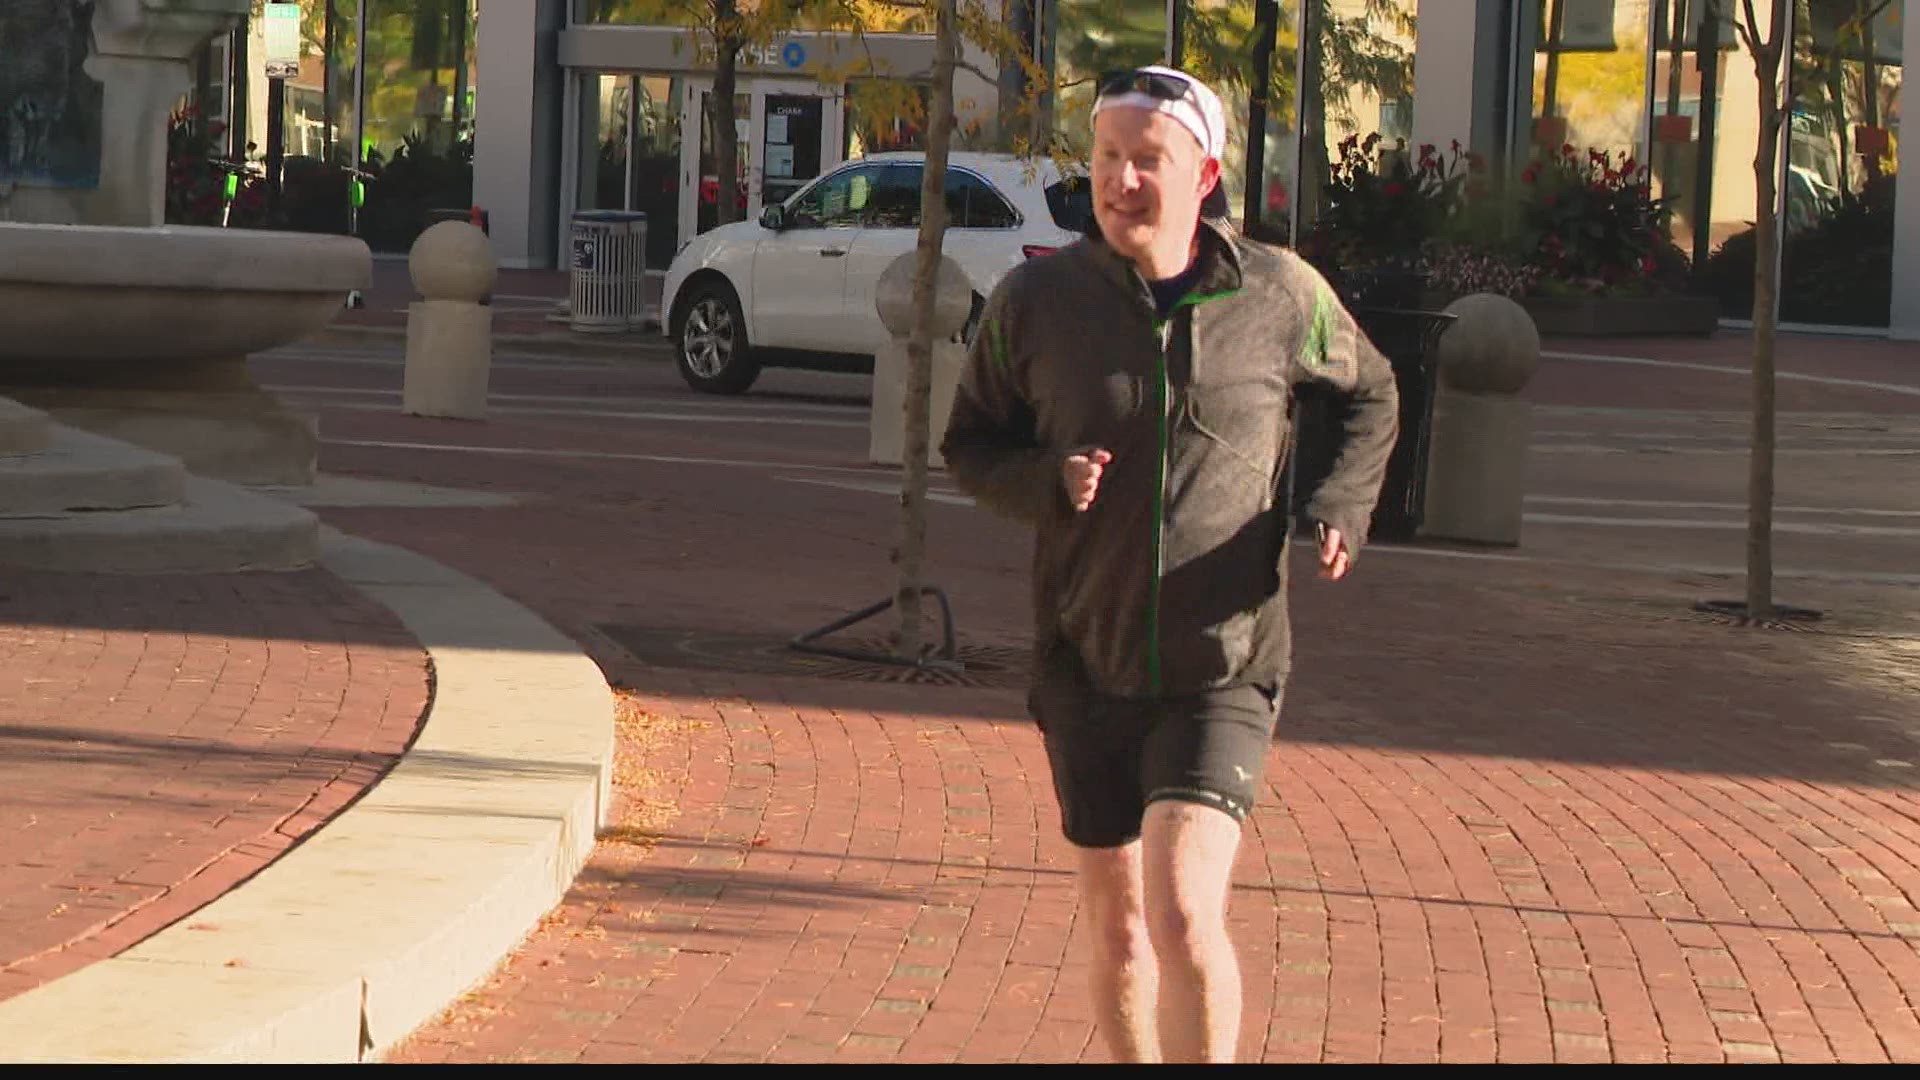 A man has turned to running to take care of his mental health during the pandemic.